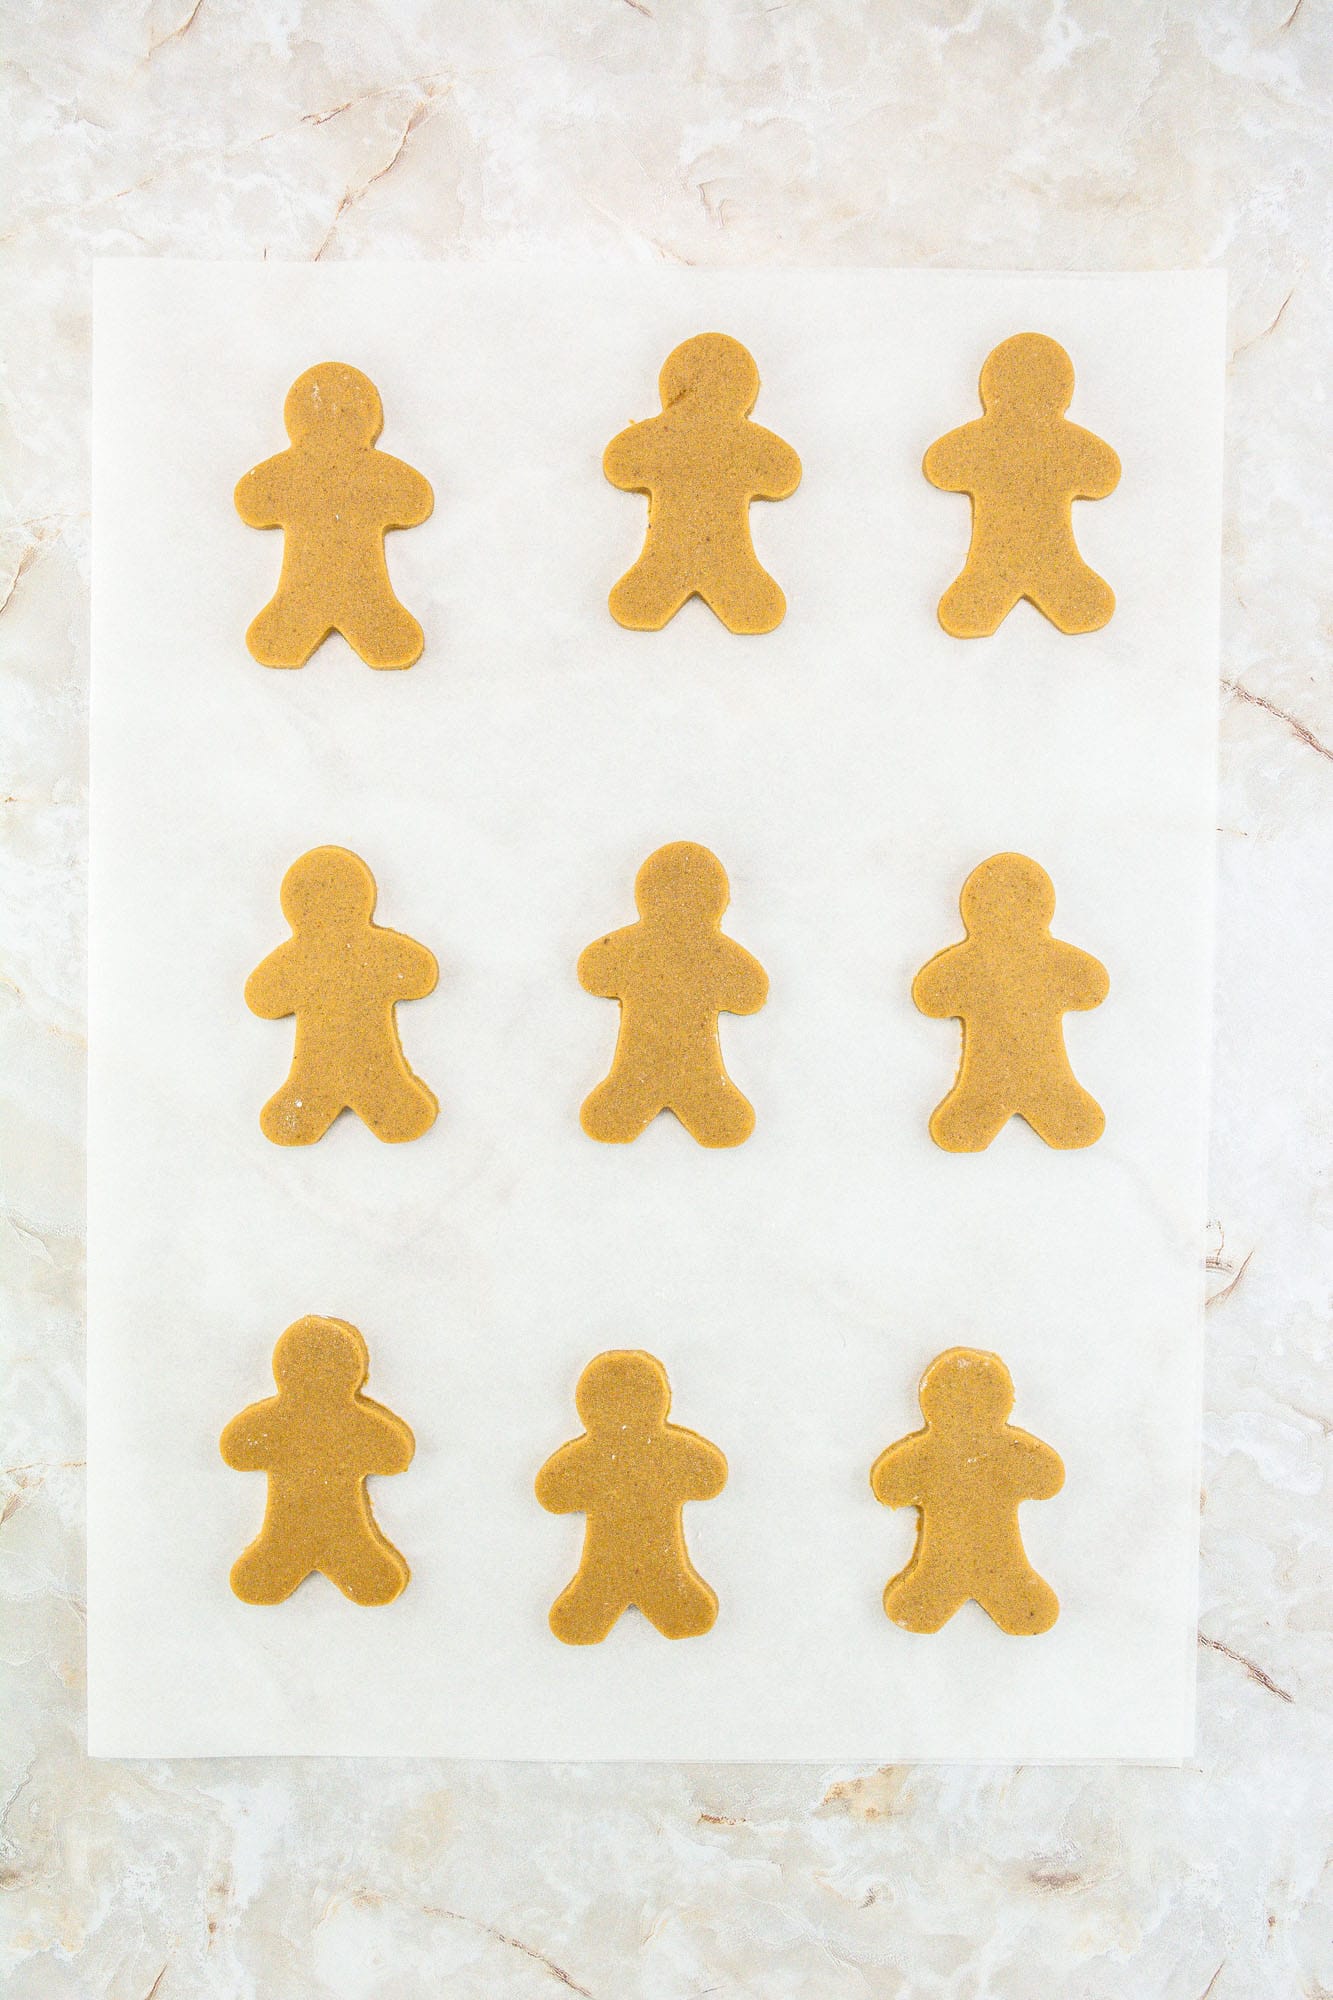 Gingerbread men cookies on parchment paper before baking